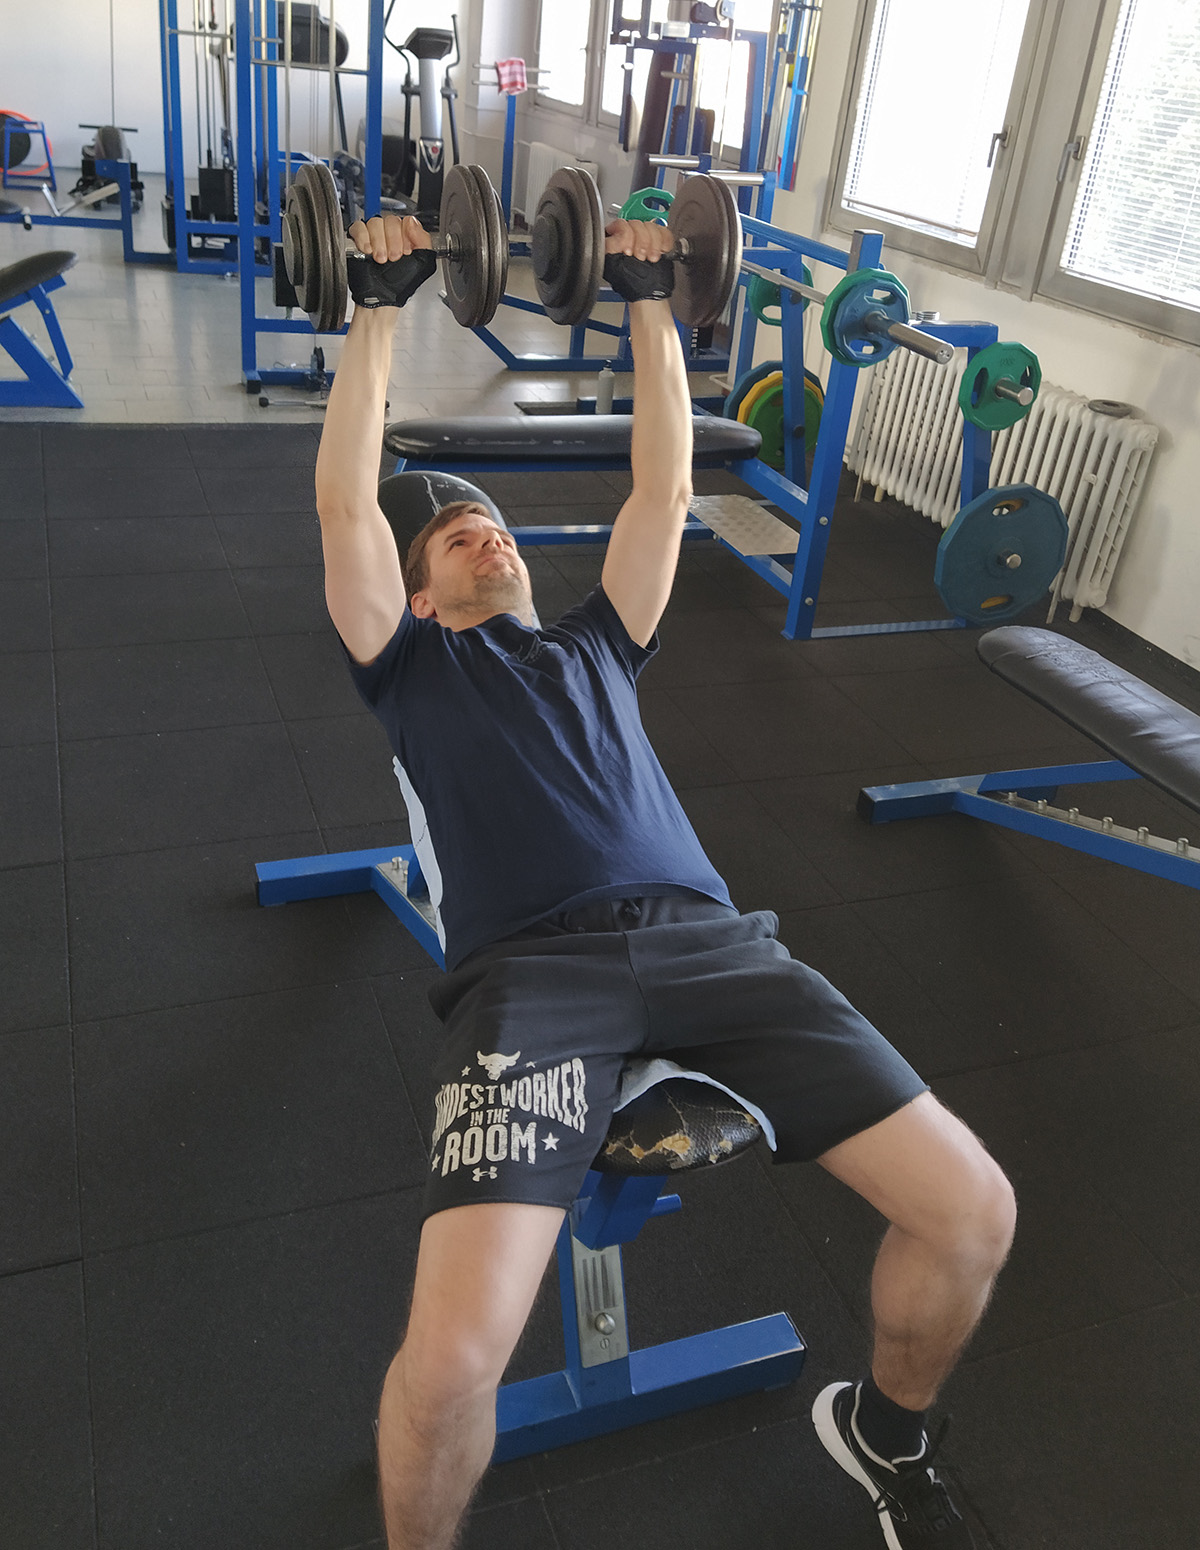 Mens sana in corpore sano: Jozef goes to the gym 3-4 times a week